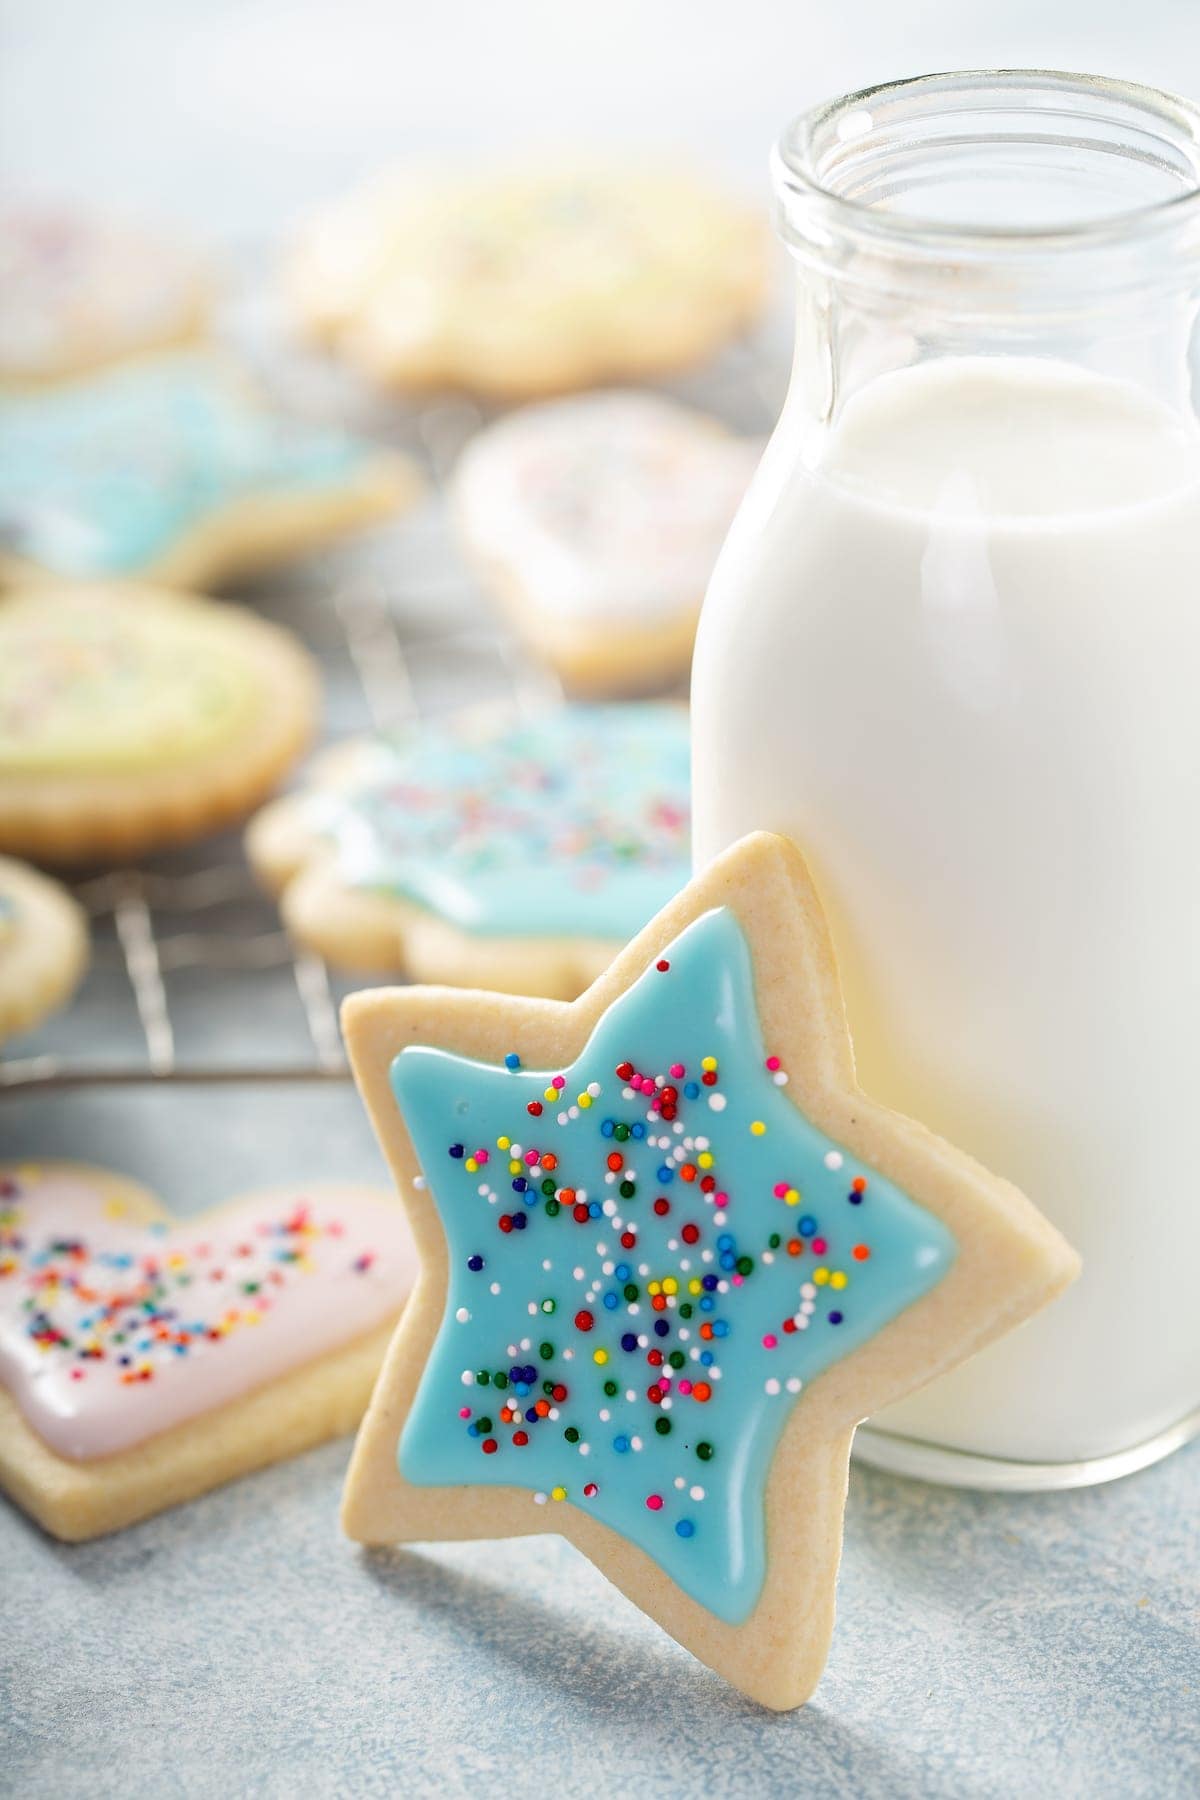 star shaped sugar cookie leaning on a glass of milk with other shaped sugar cookies in the background